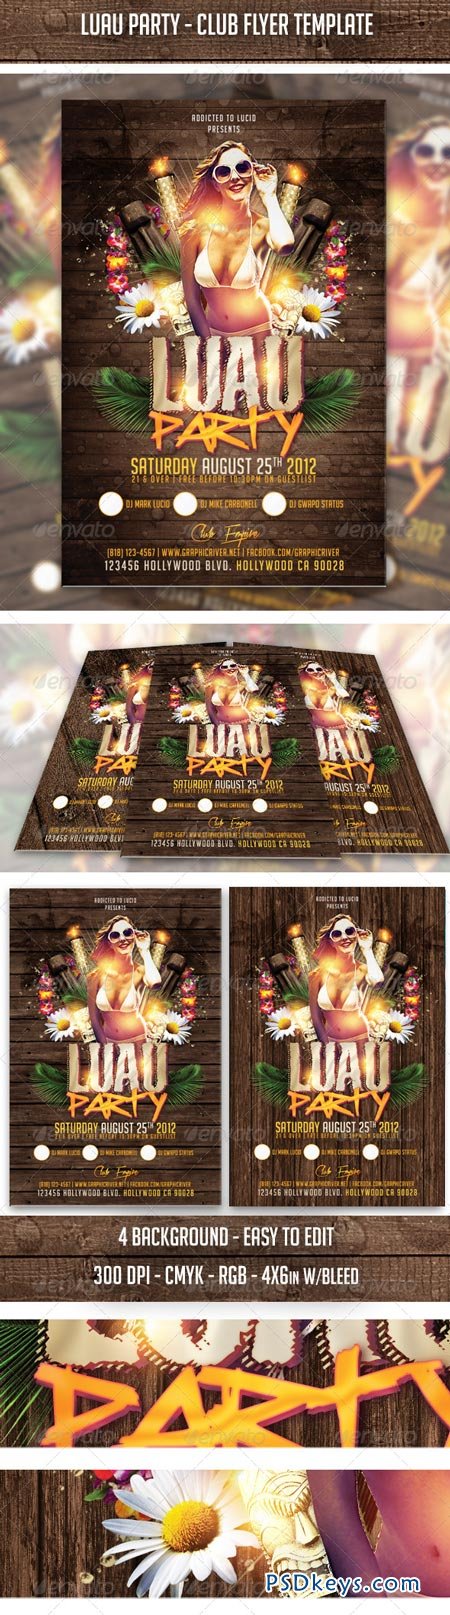 Luau Party - Club Flyer Template 2621586